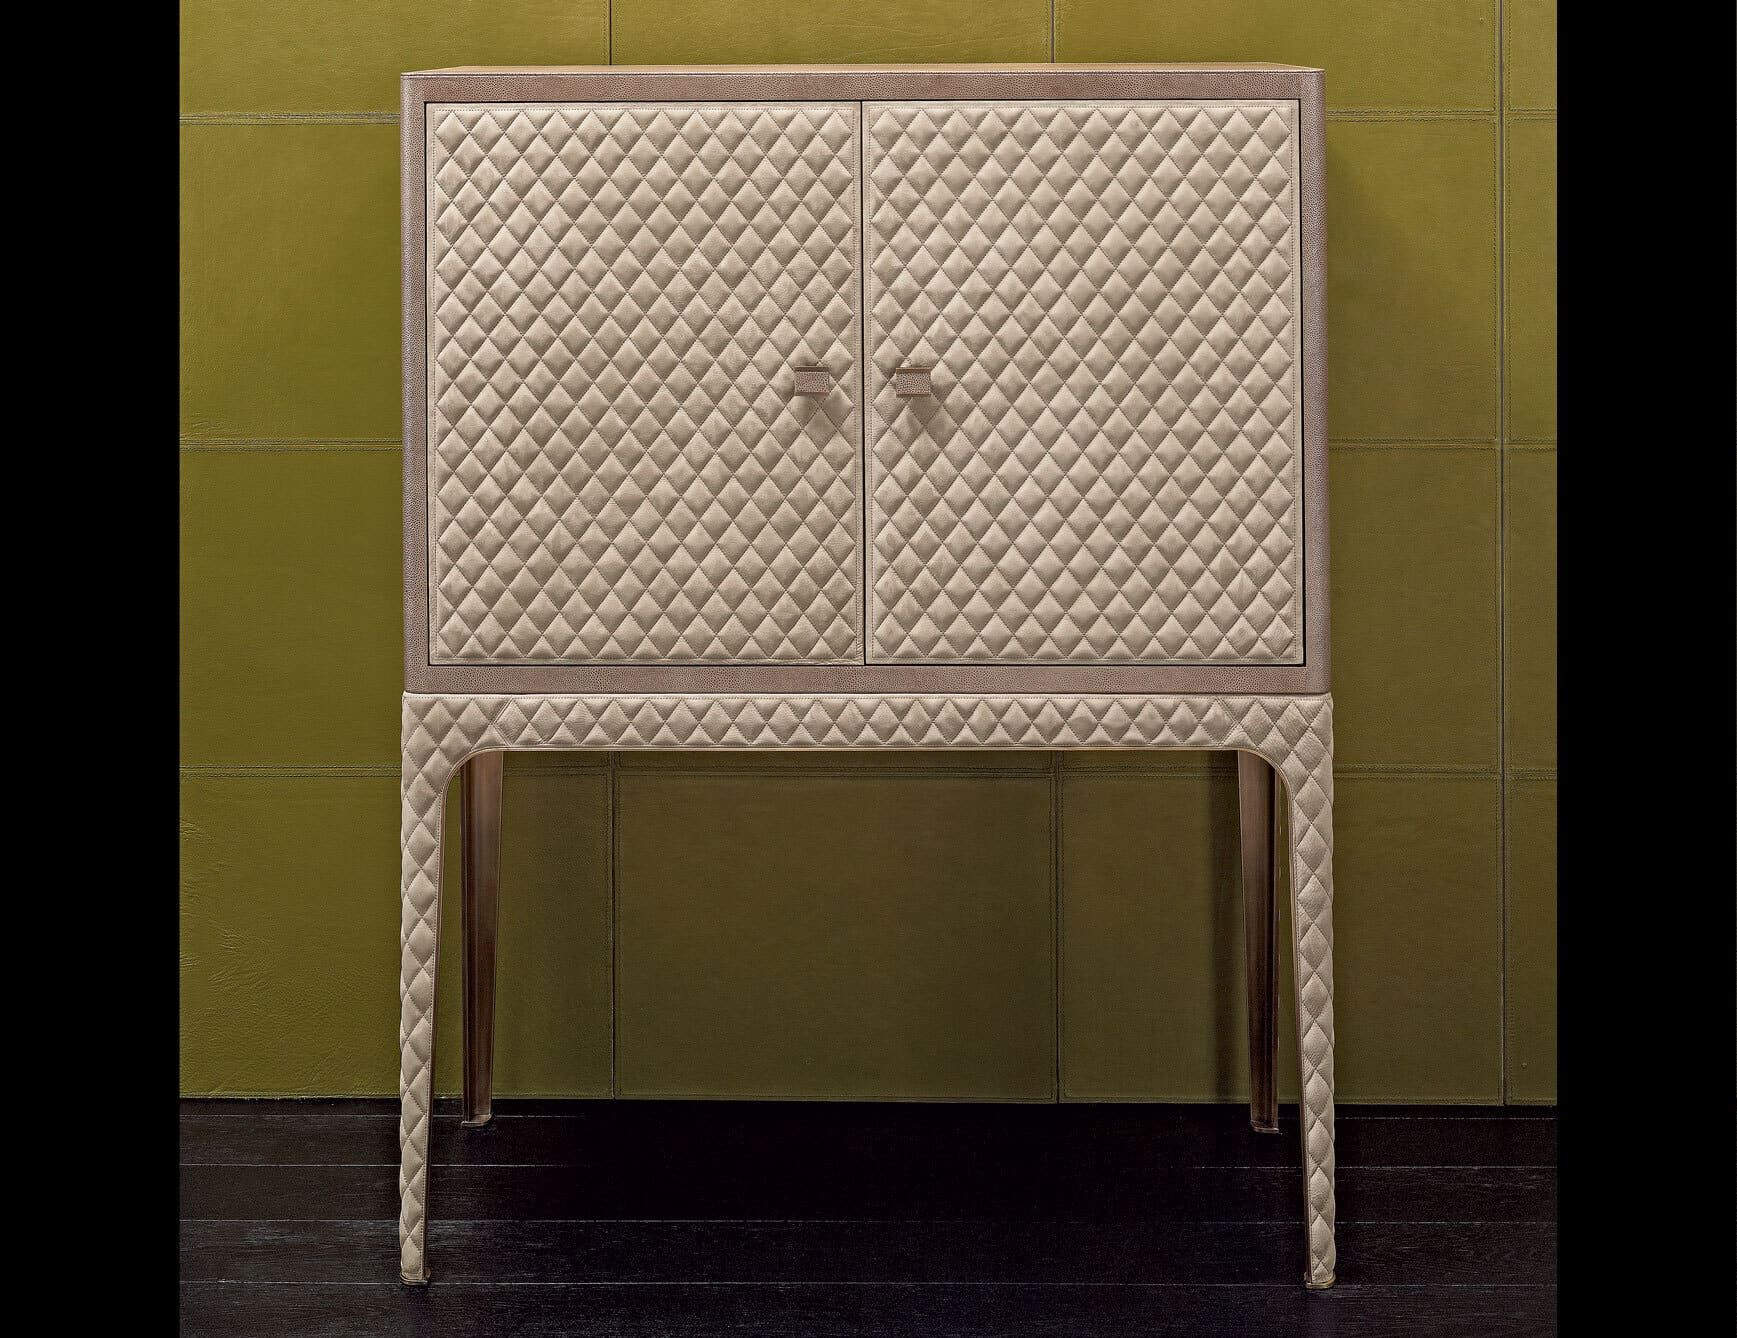 Ciry modern luxury cabinet with beige leather